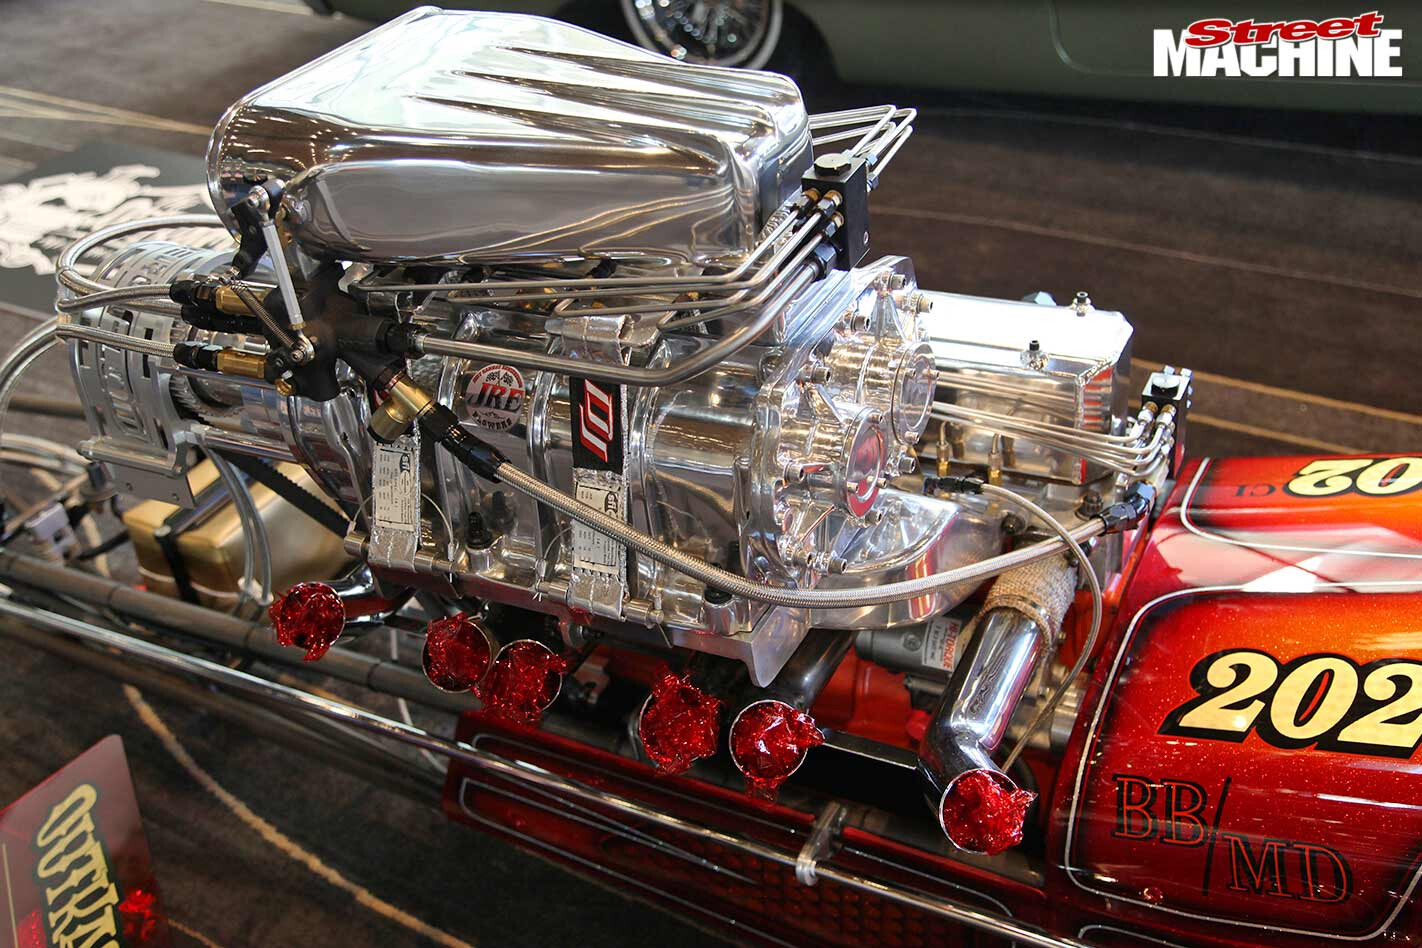 Holden powered dragster engine